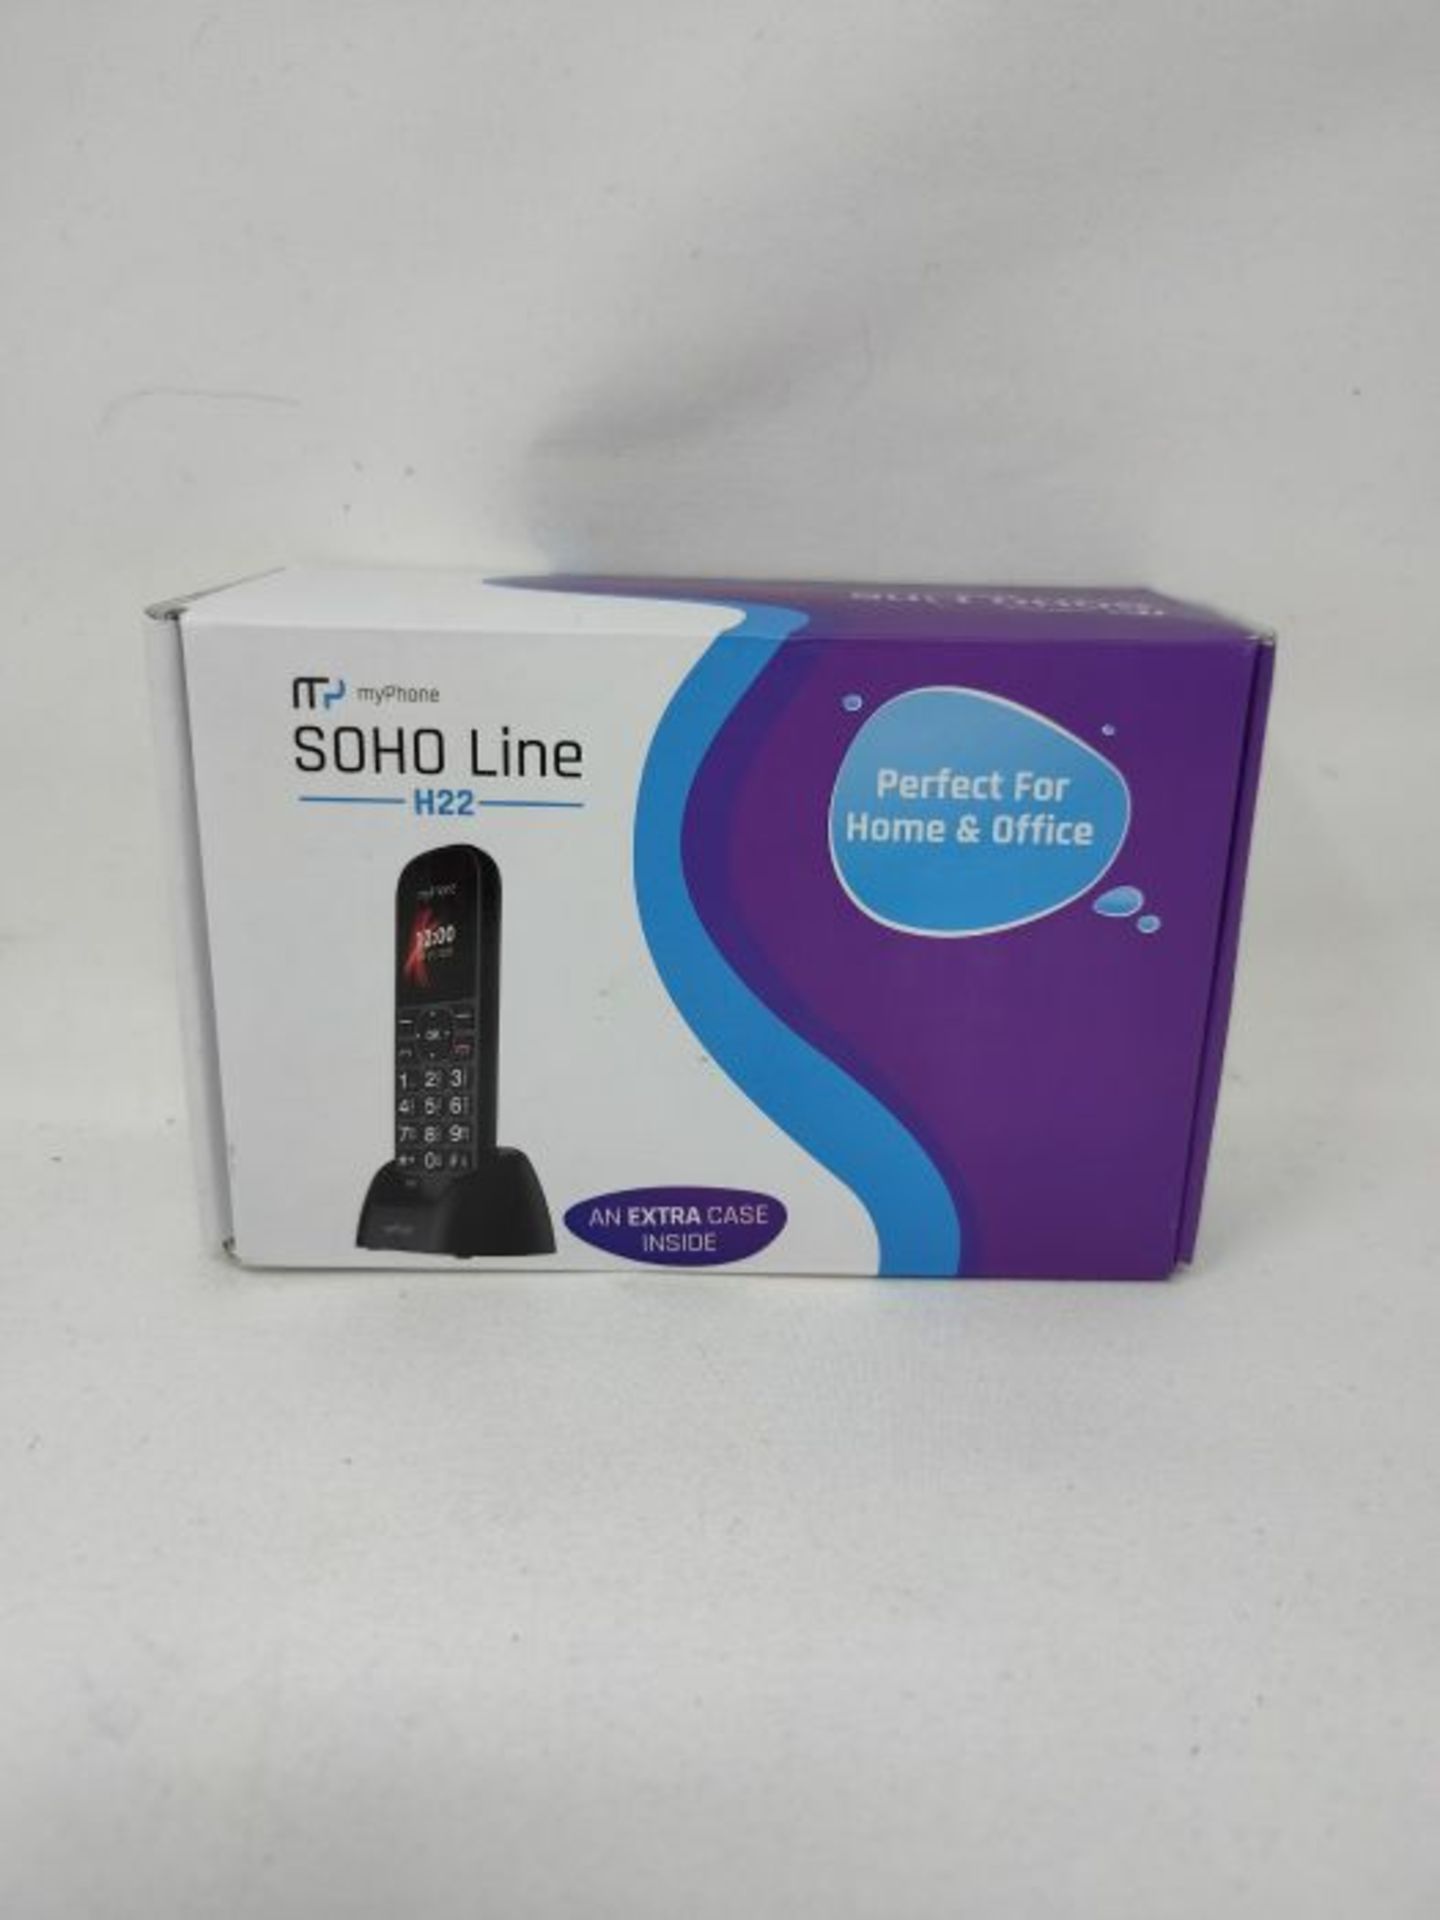 myPhone SOHO Line H22 GSM Desk Phone for Office and Home with Colour Display, Hands-Fr - Image 2 of 4